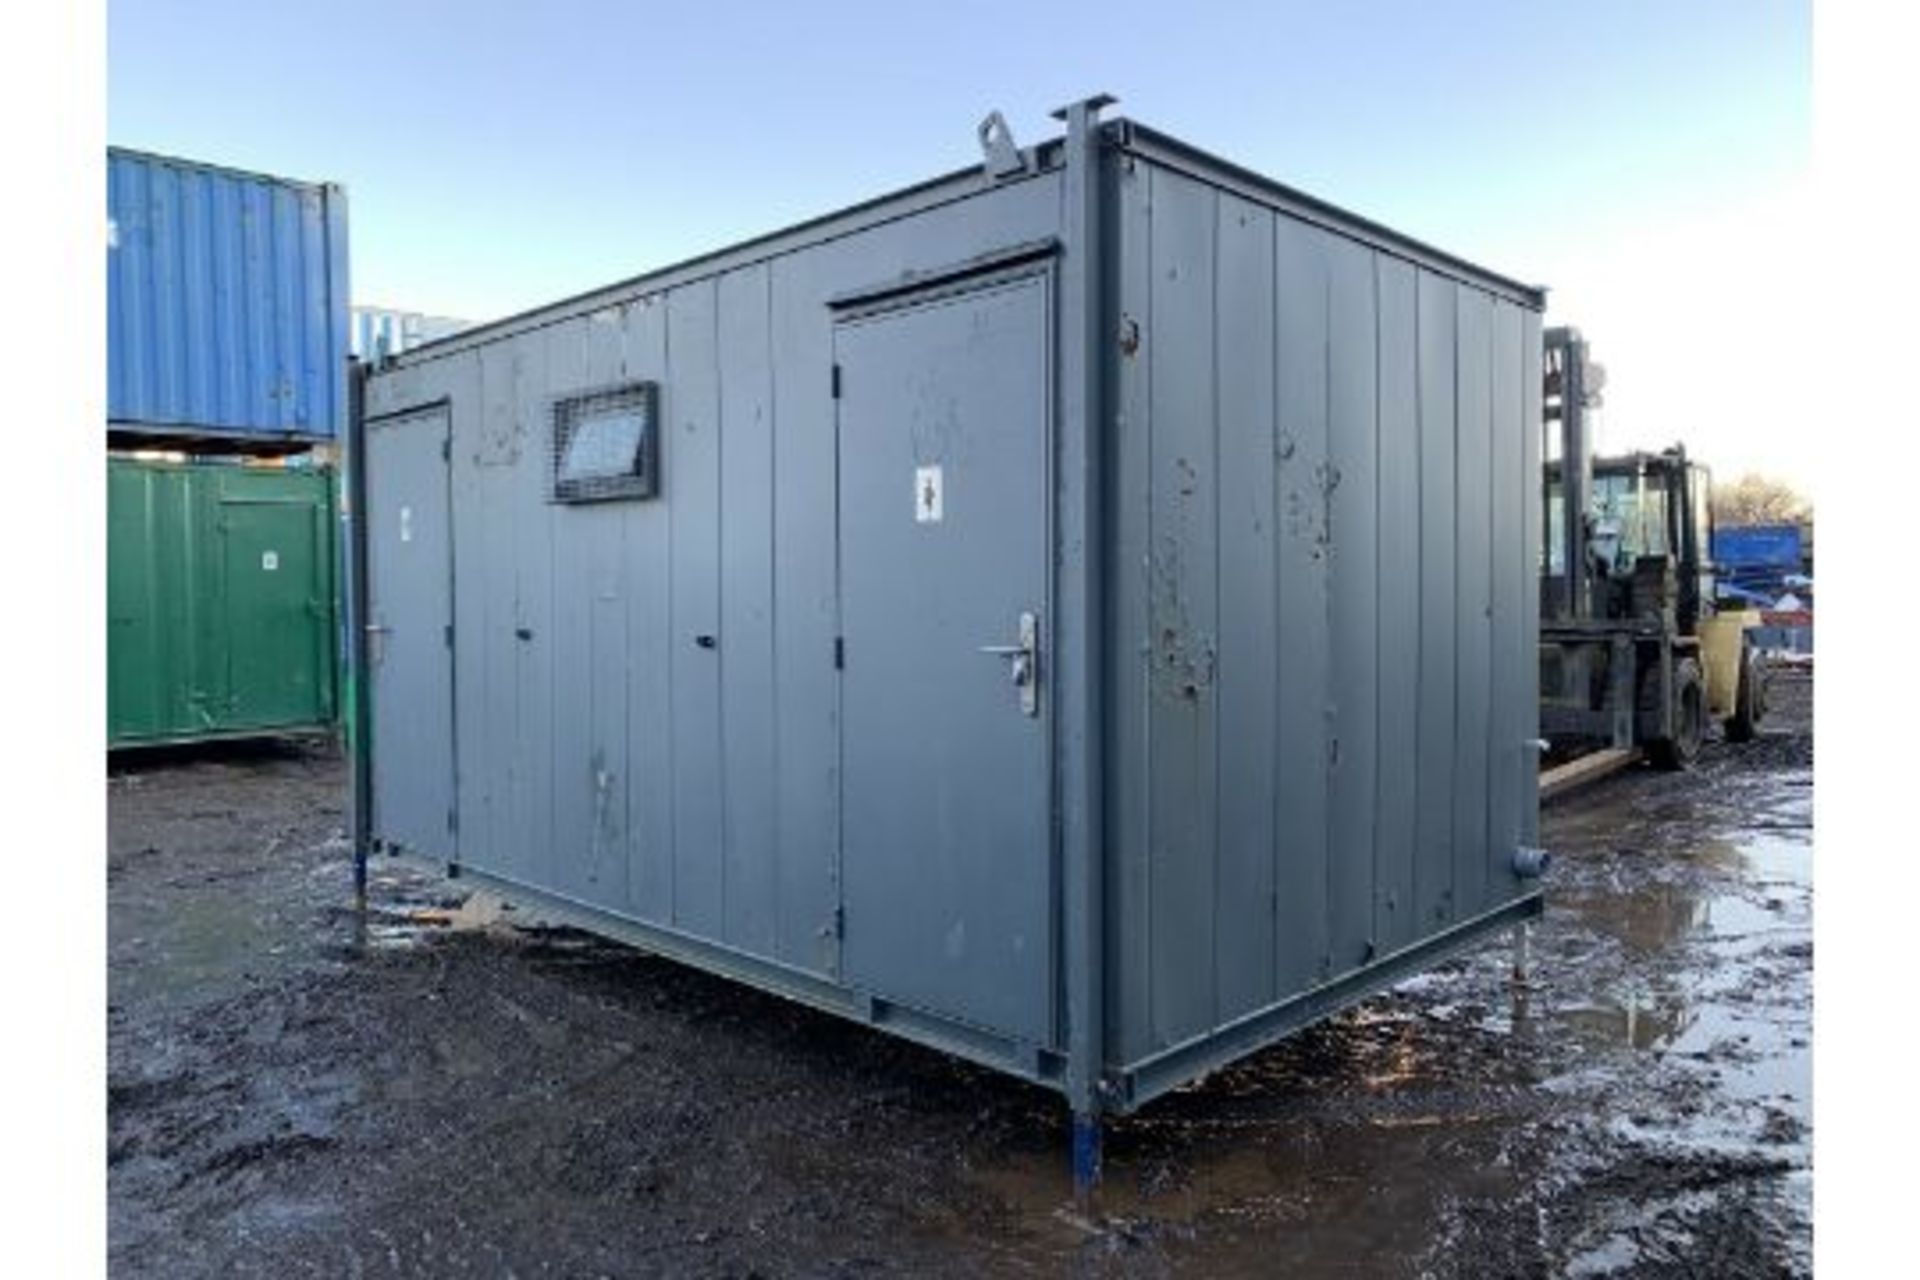 Portable Toilet Block Site Loo Cabin Steel Contain - Image 2 of 10